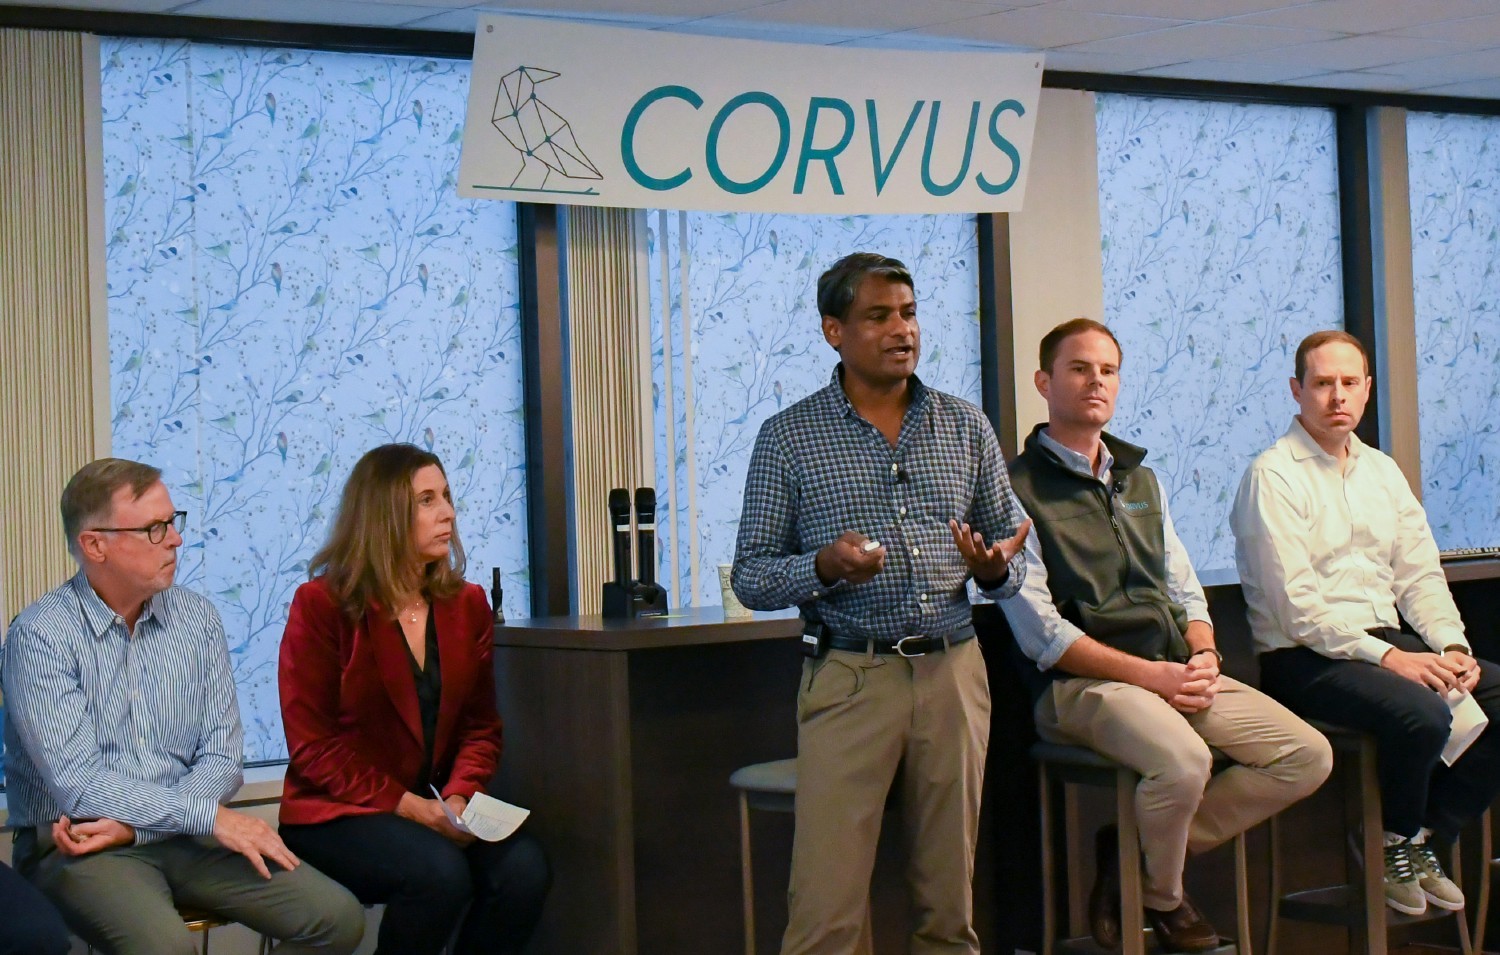 Corvus's executive leadership addresses employees during an all-hands meeting in the Boston office